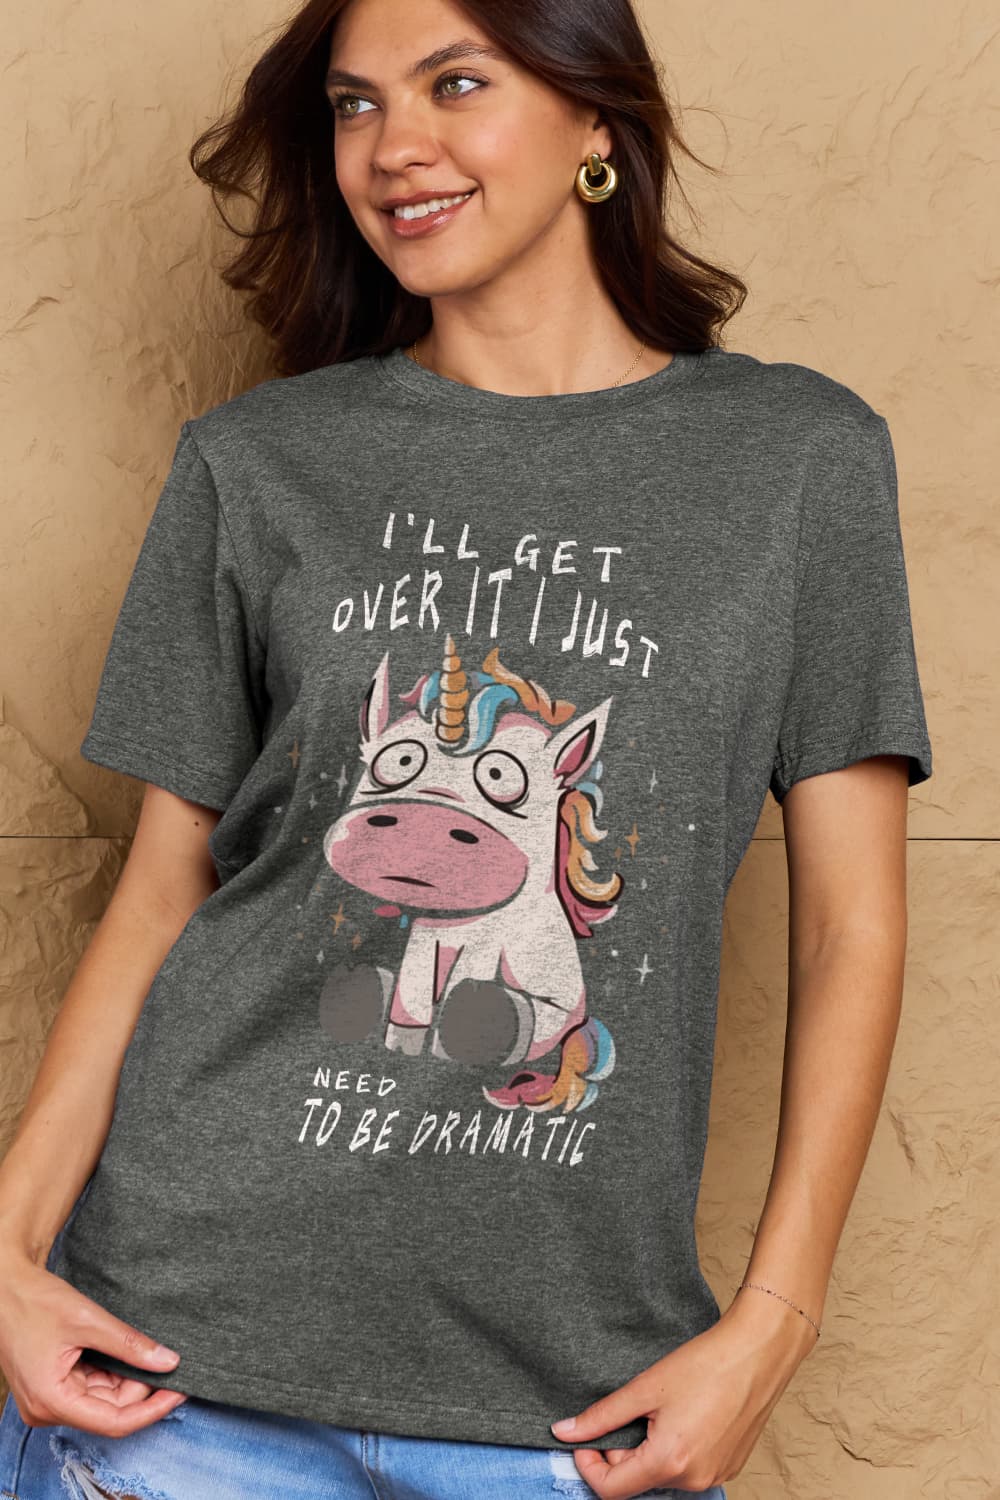 I'LL GET OVER IT I JUST NEED TO BE DRAMATIC Graphic Cotton Tee